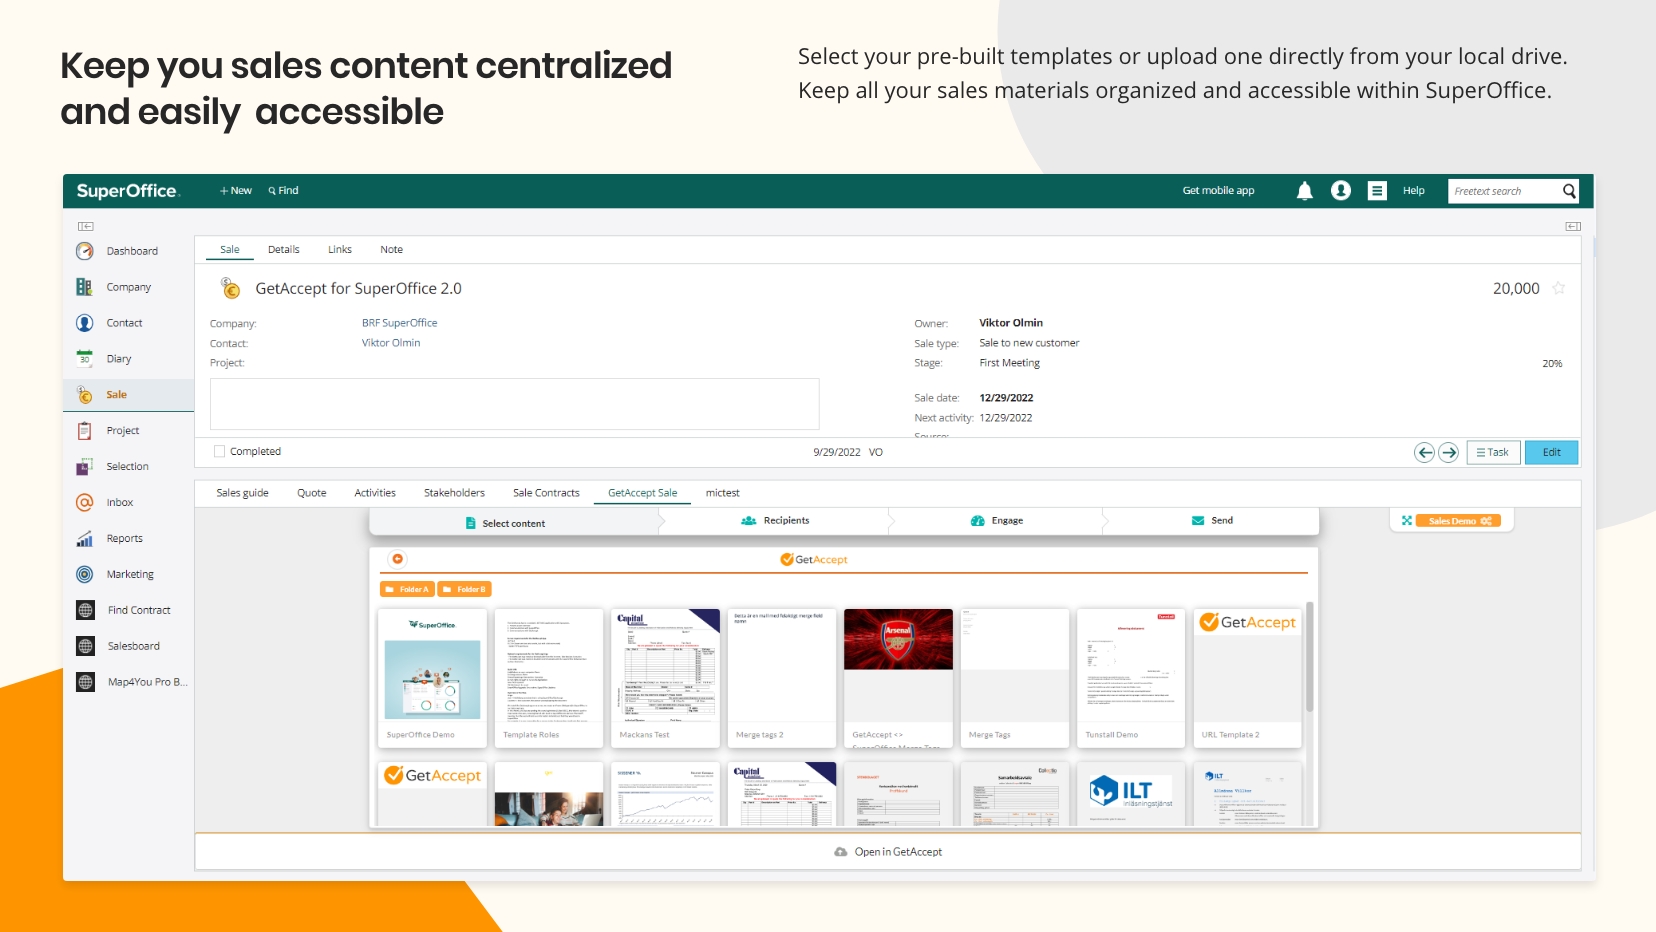 Keep you sales content centralized and easily accessible